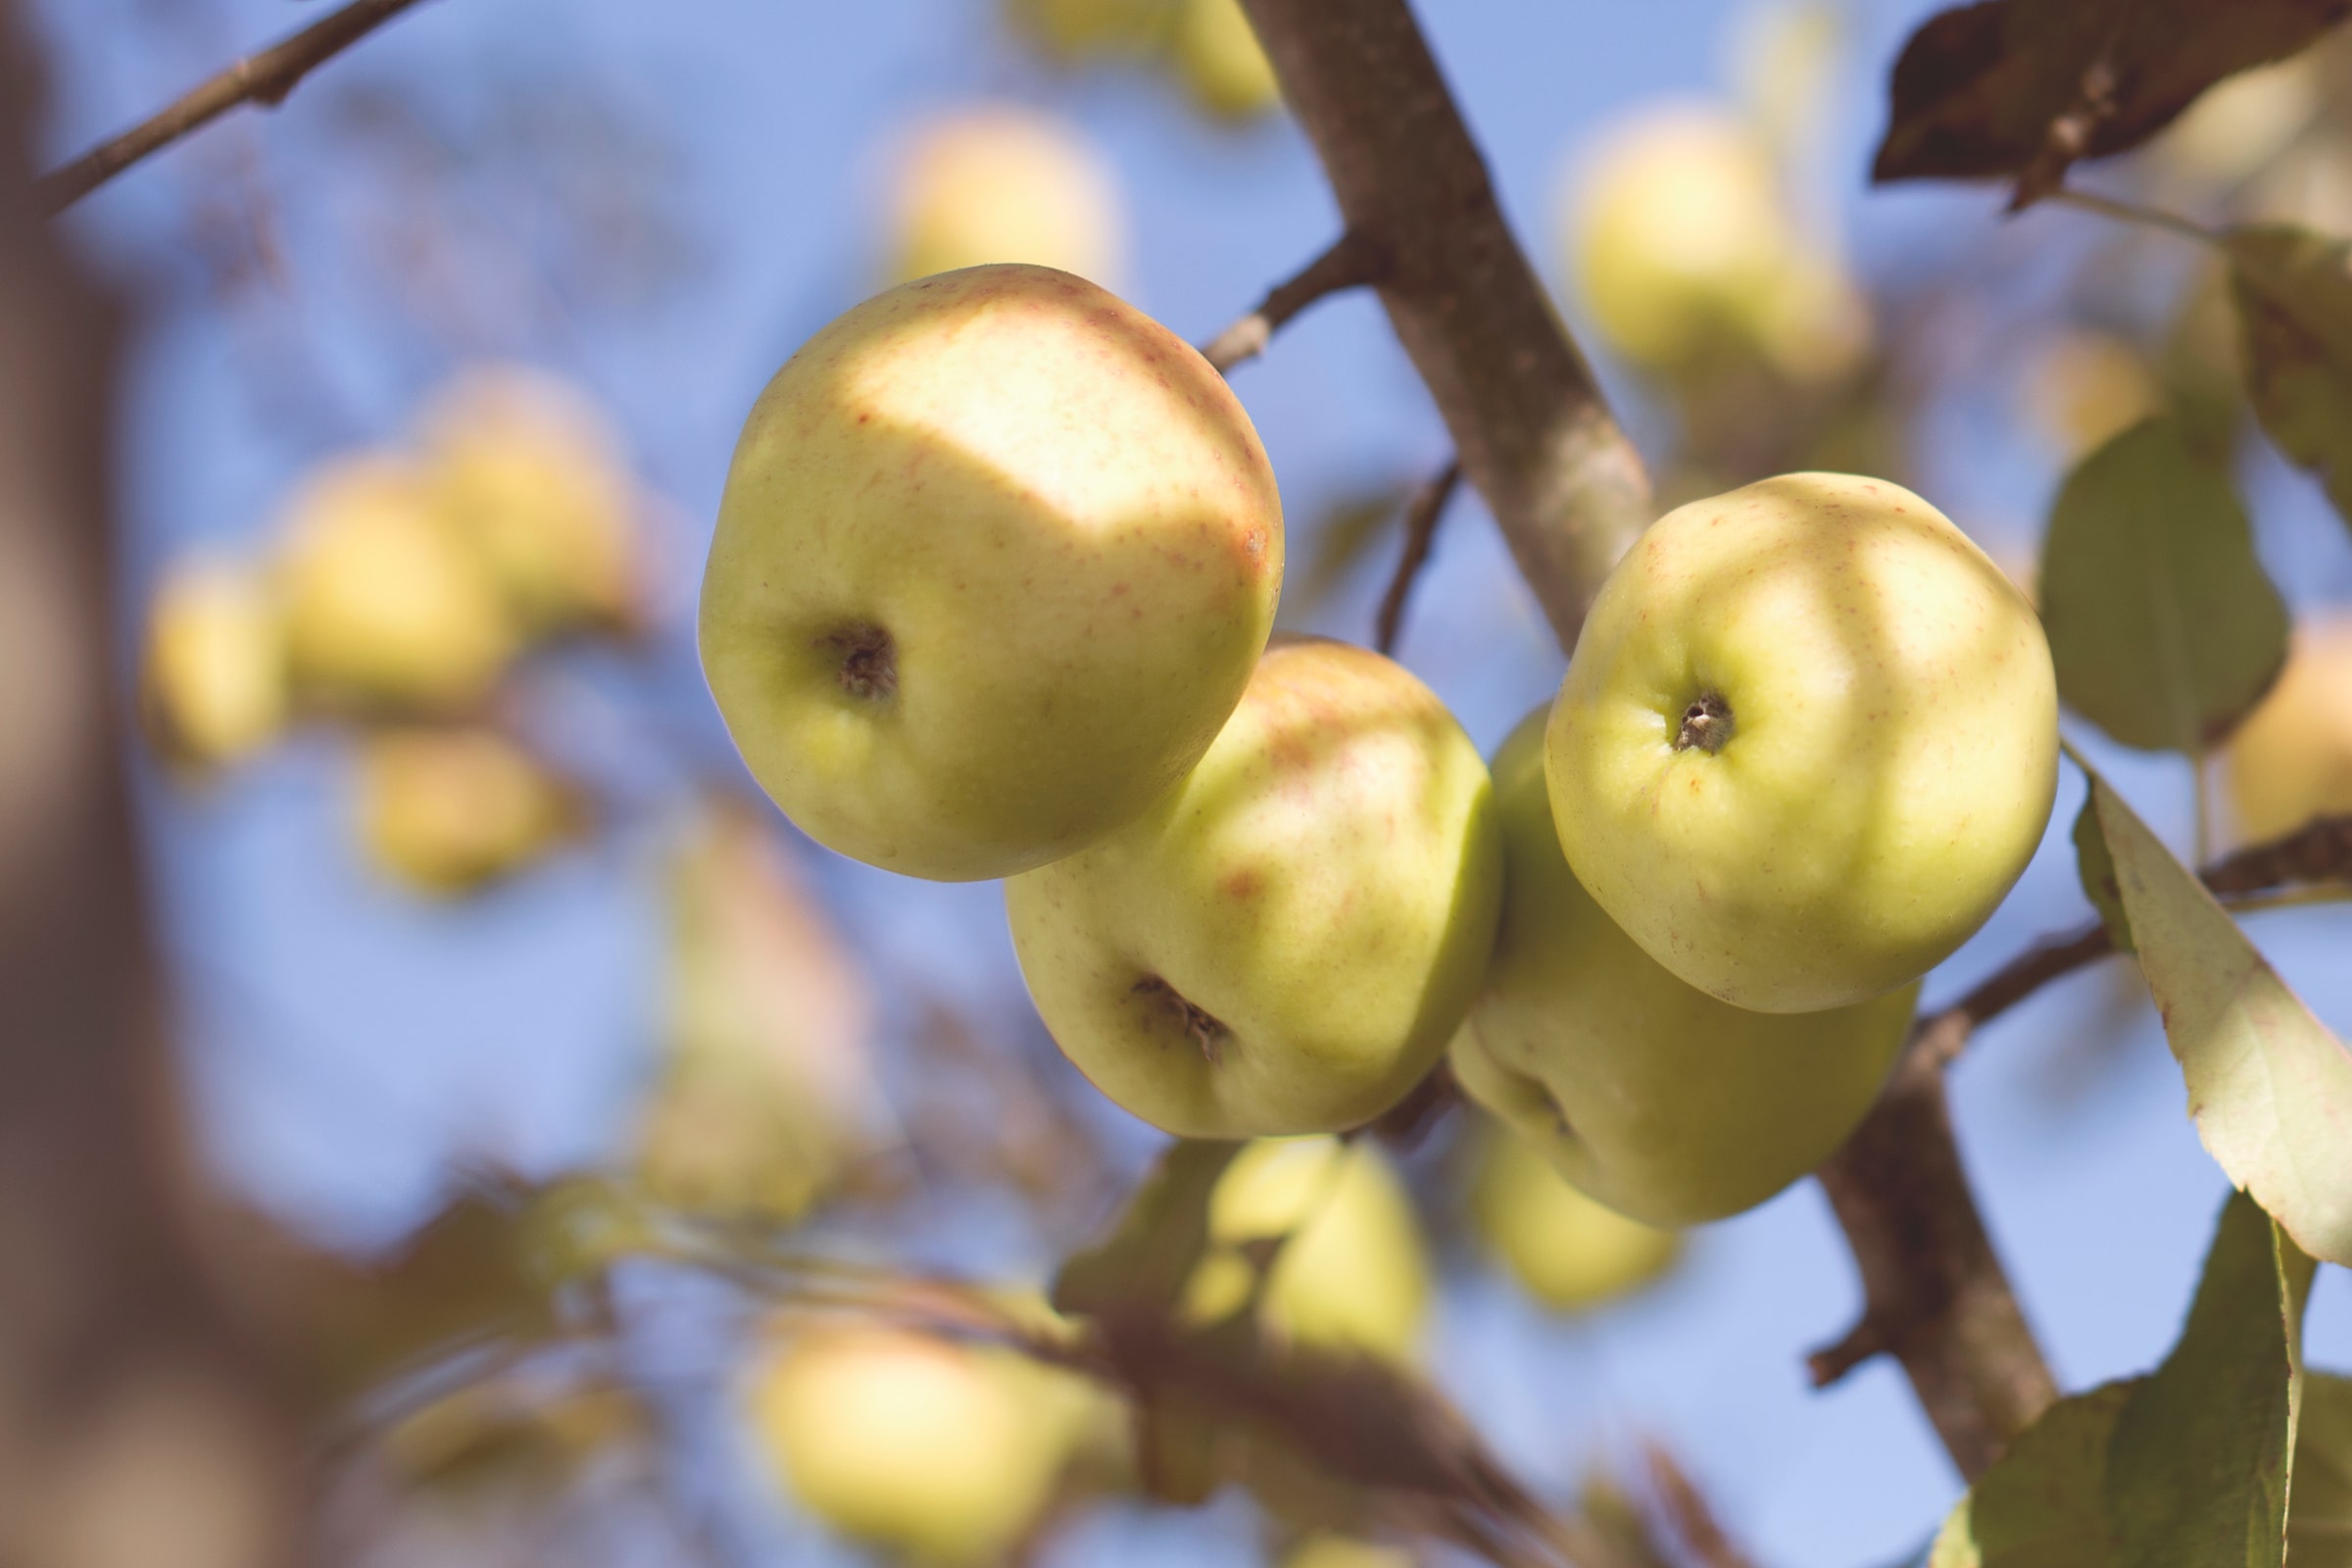 Arctic® Apples: A Bite Out Of The Science